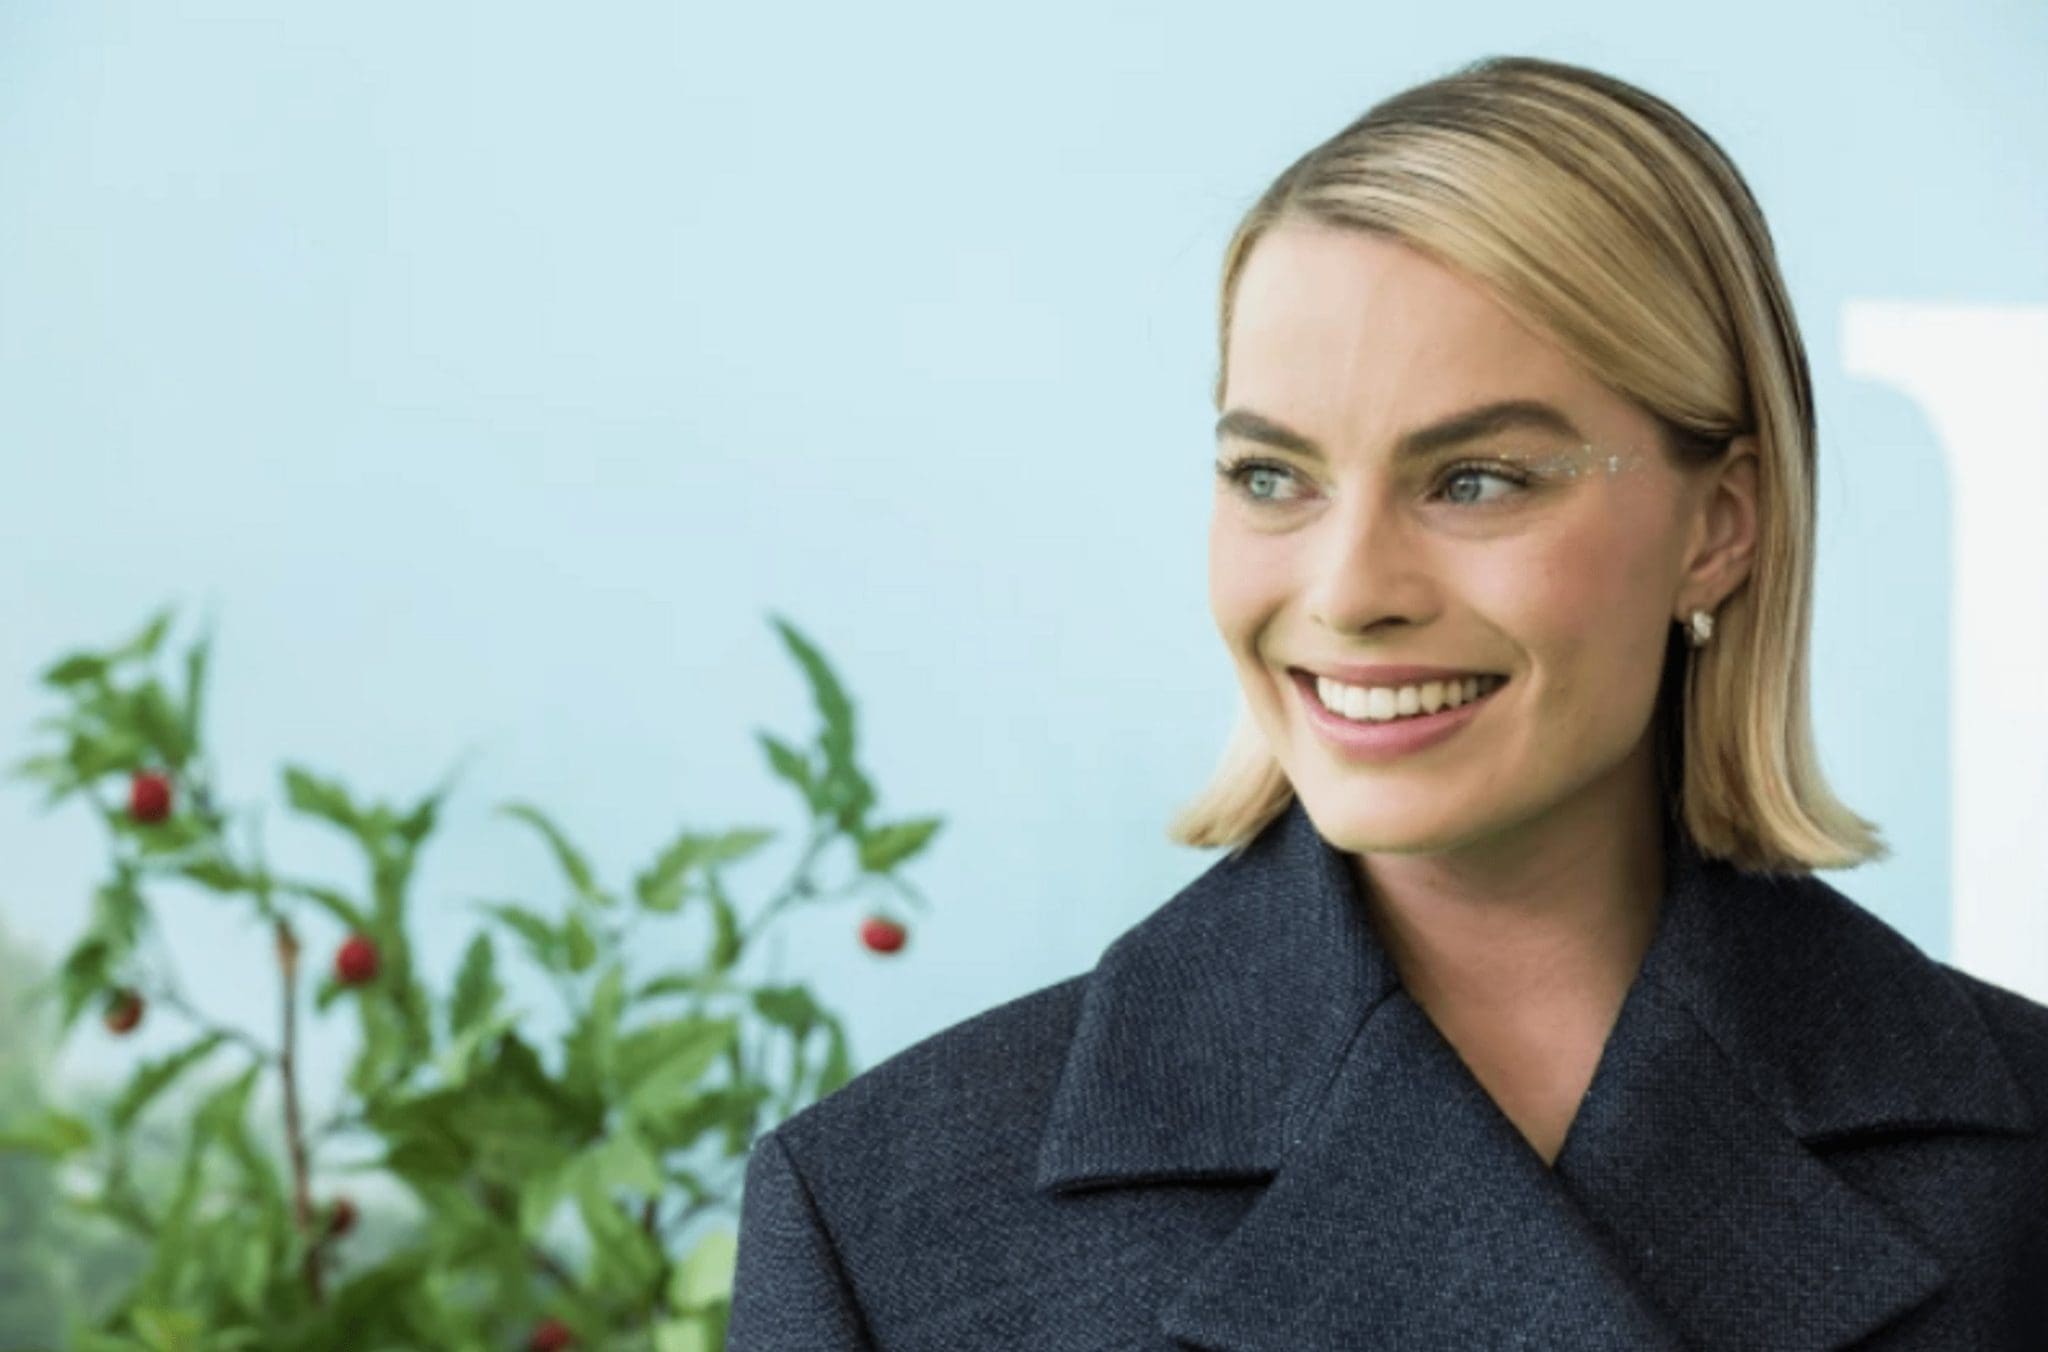 Following The Release Of The Actress's Pay For The Movie 'Barbie' Margot Robbie Was Named The Highest-Paid Actress In Hollywood